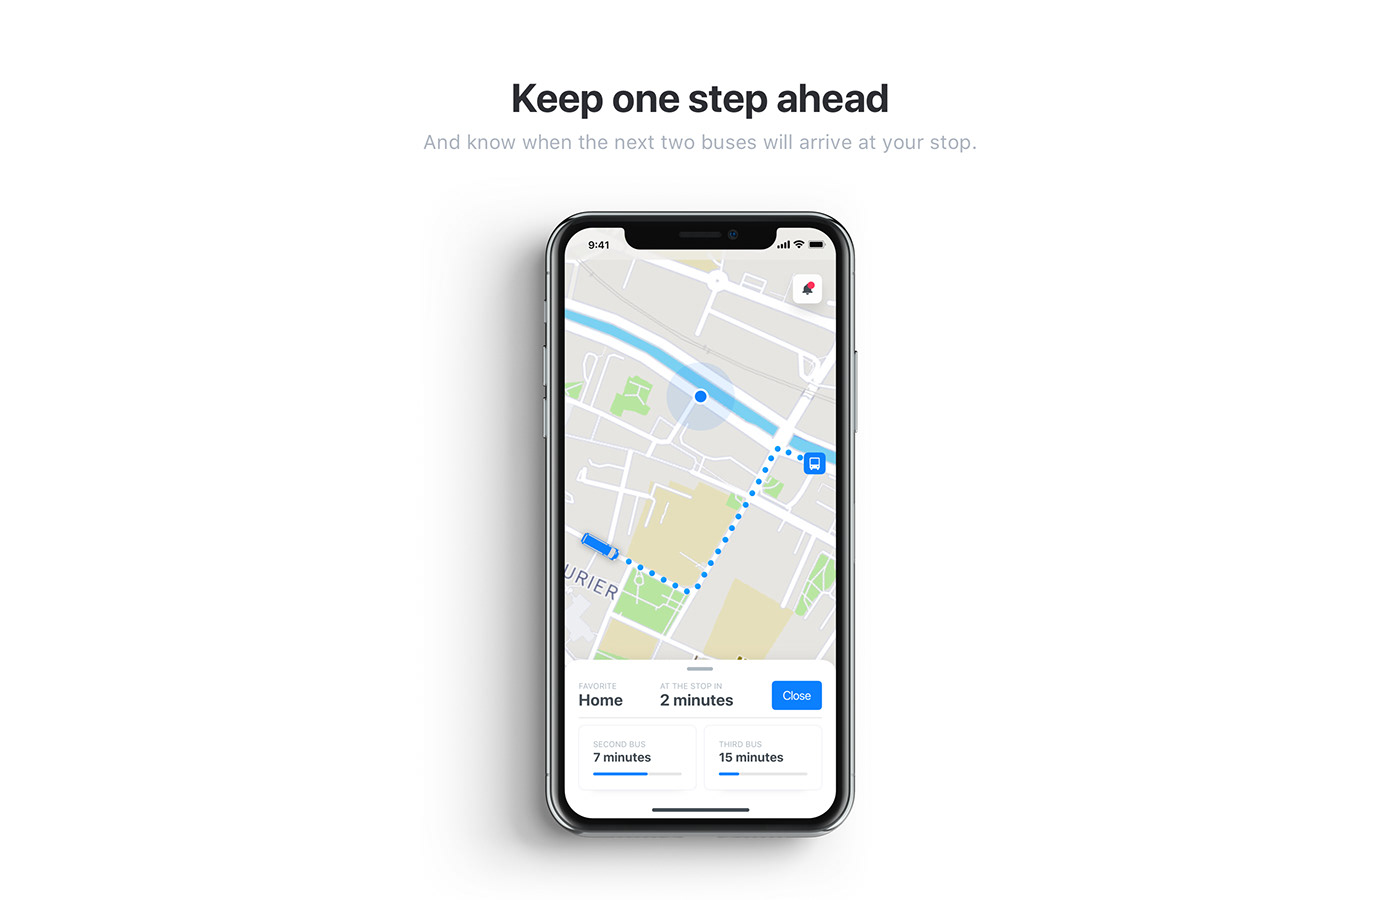 ux UI ios animation  interaction bus tracking Transport map location